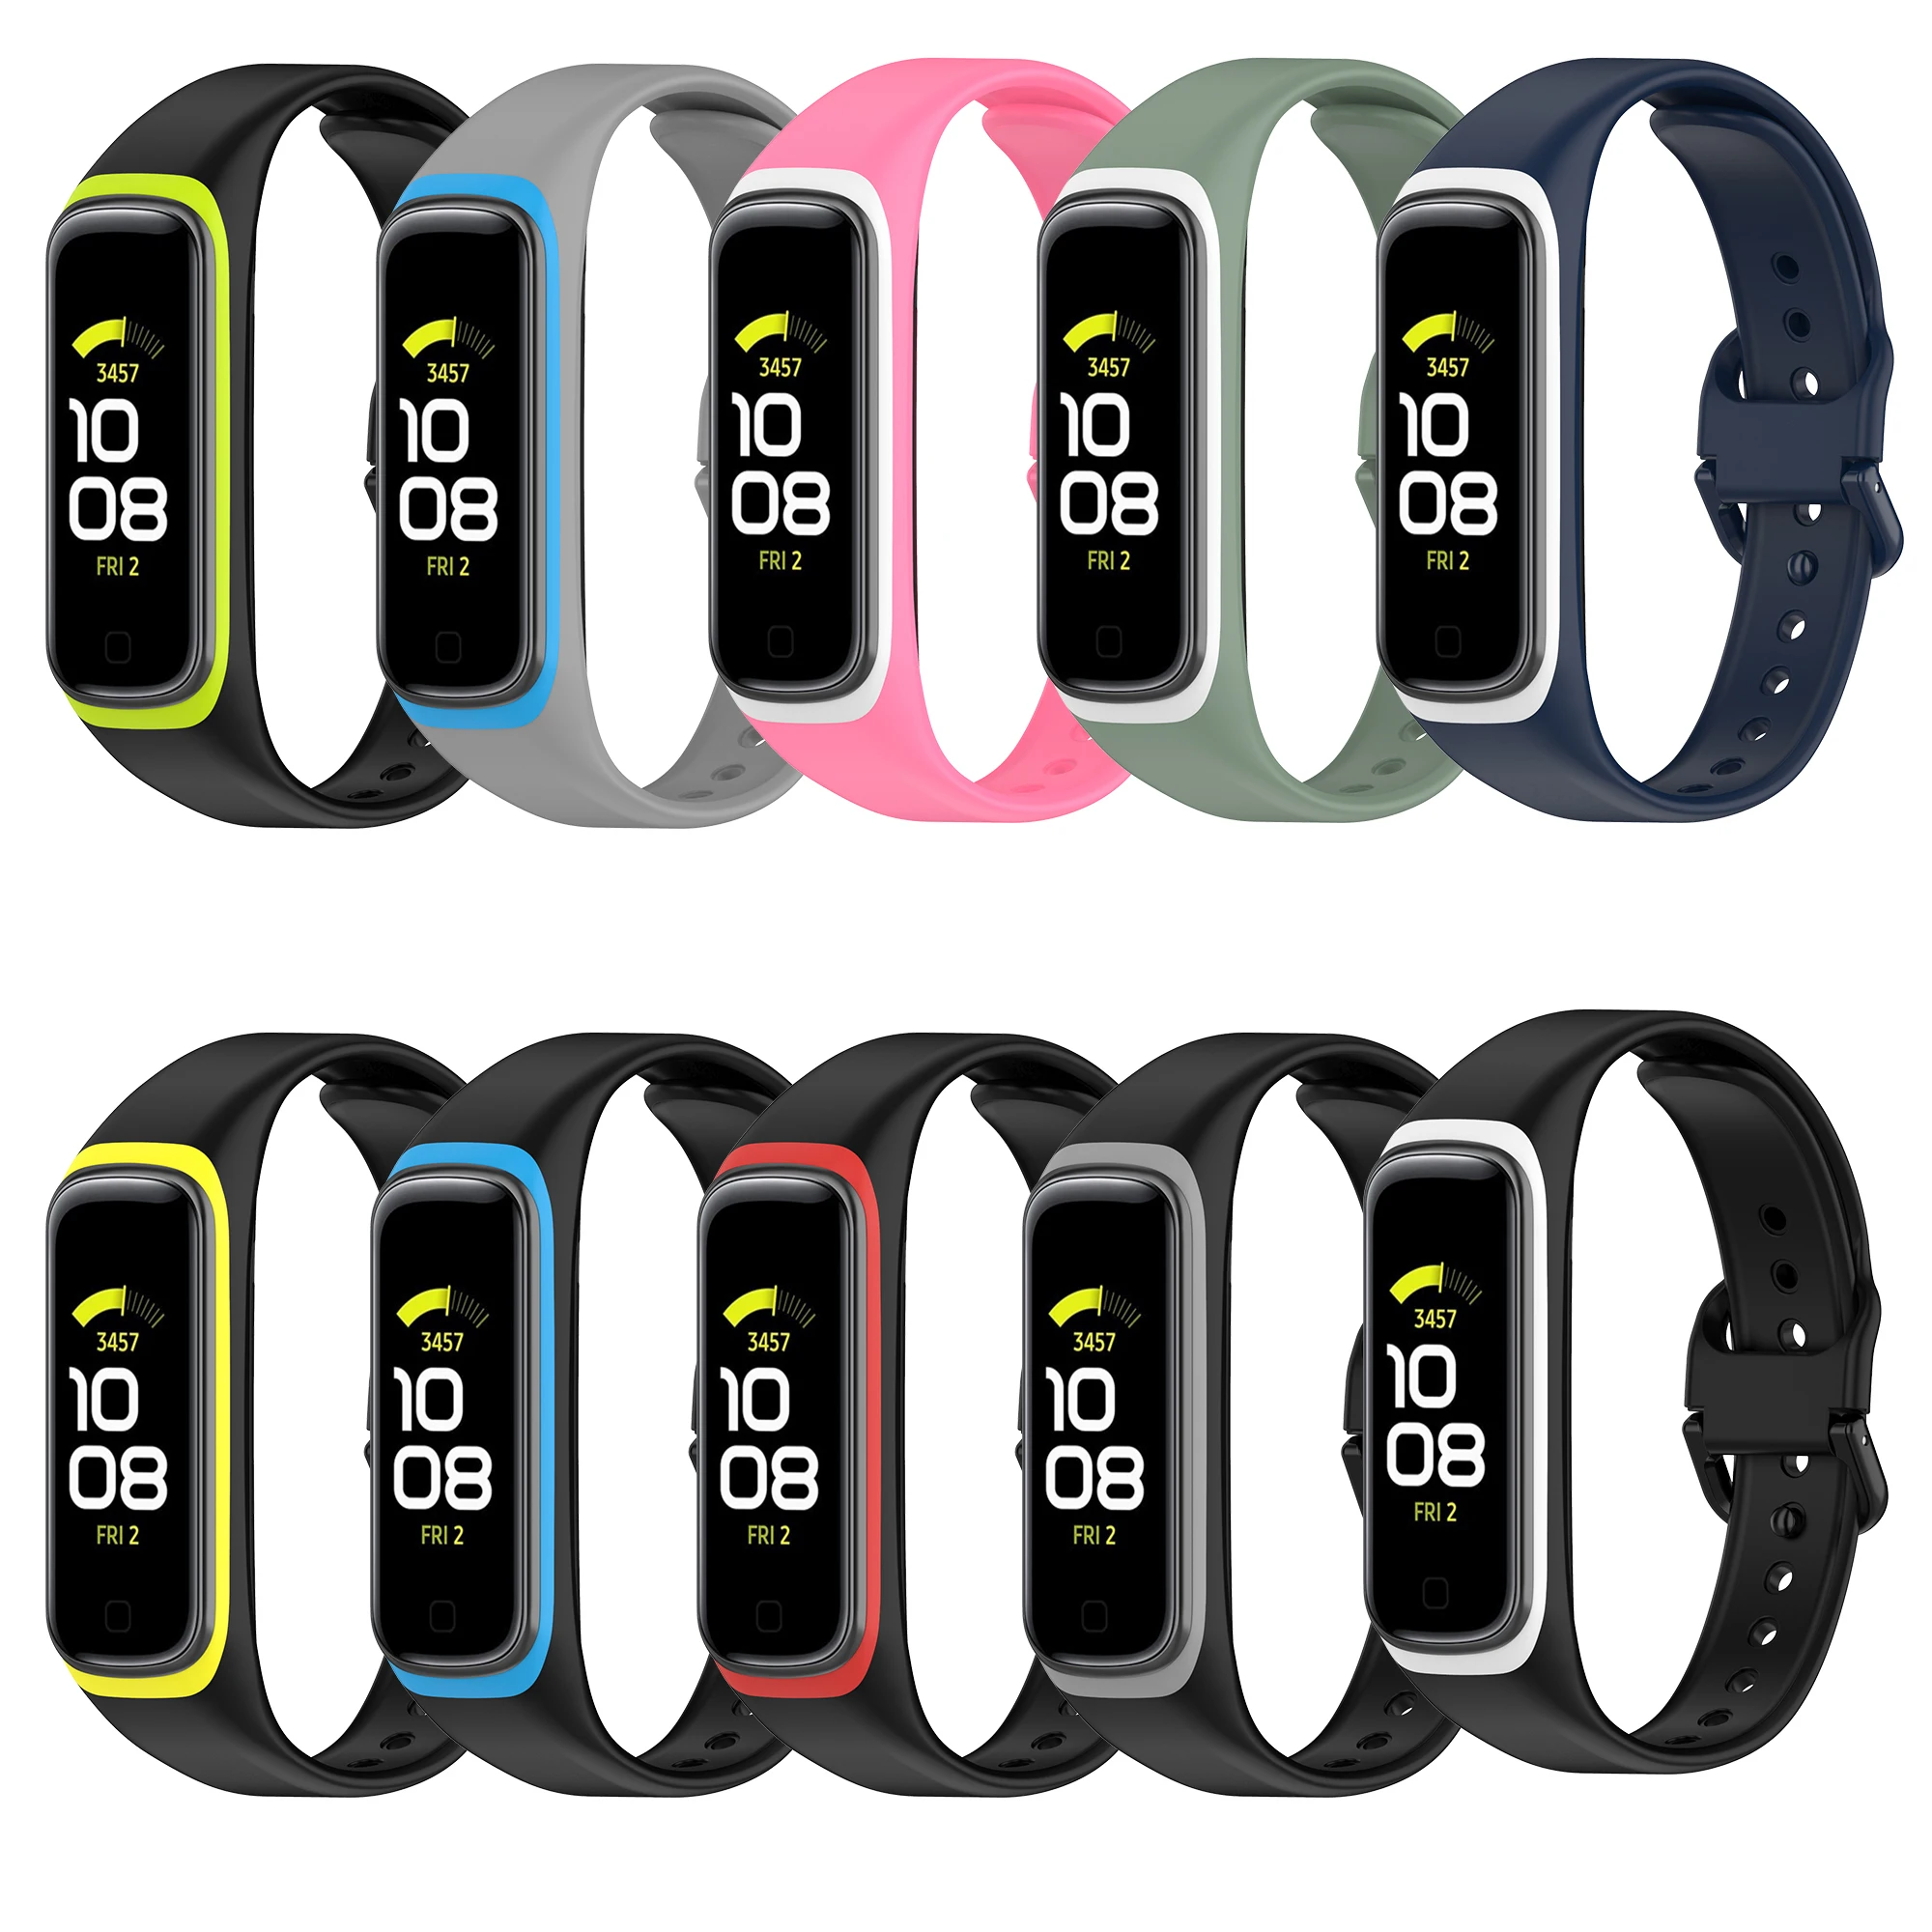 

Tschick Silicone Bracelet Band for Samsung Galaxy Fit 2 SM-R220 Watchband Wrist Strap Sport Replacement Band for Galaxy Fit2, Multi-color optional or customized